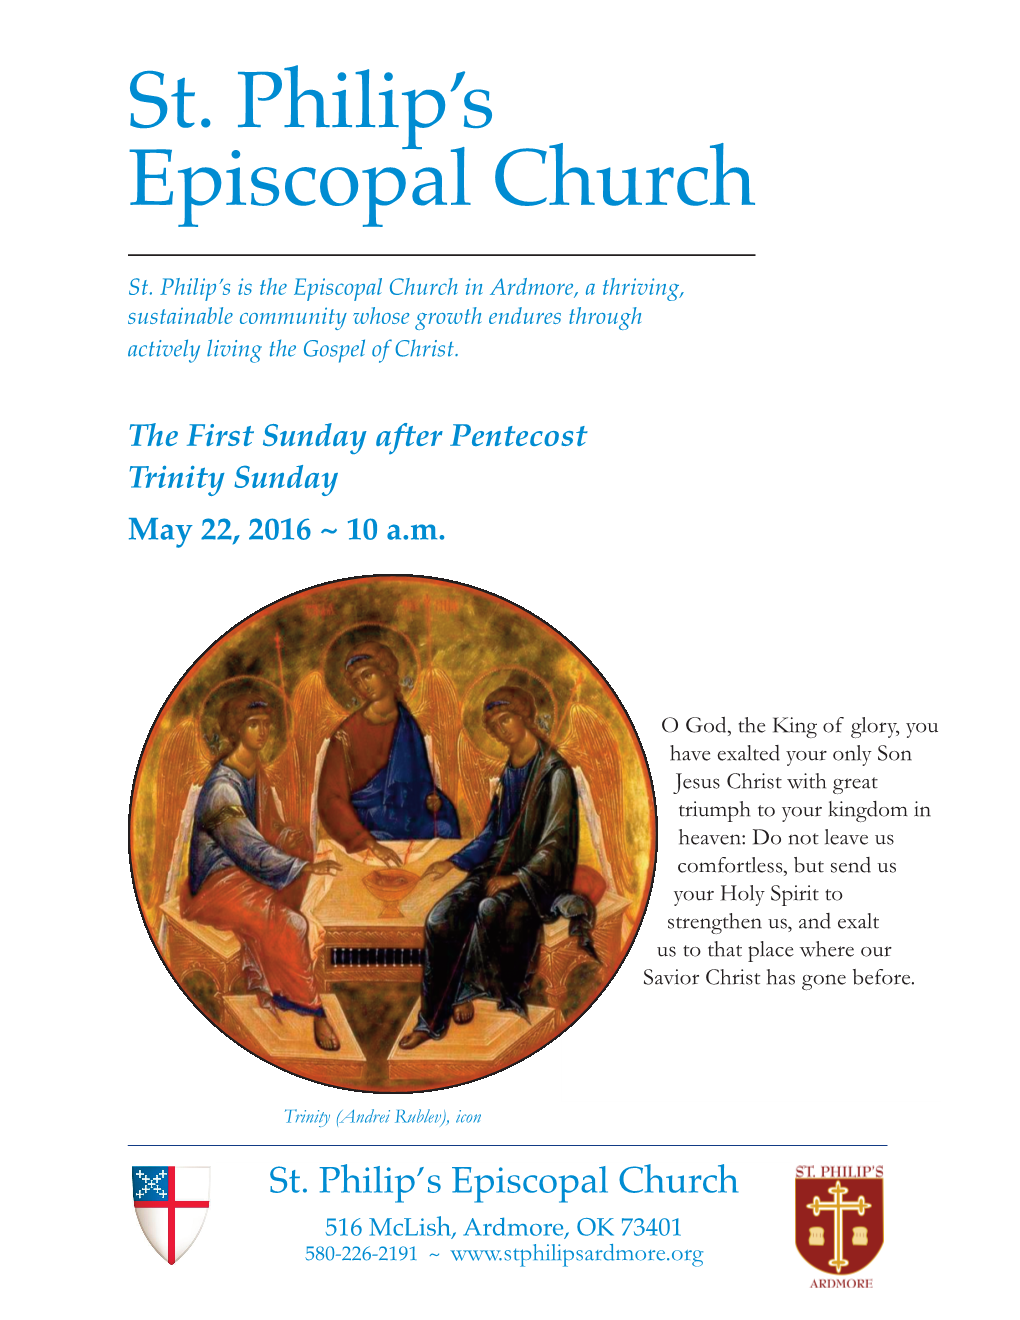 Welcome to St. Philip's Episcopal